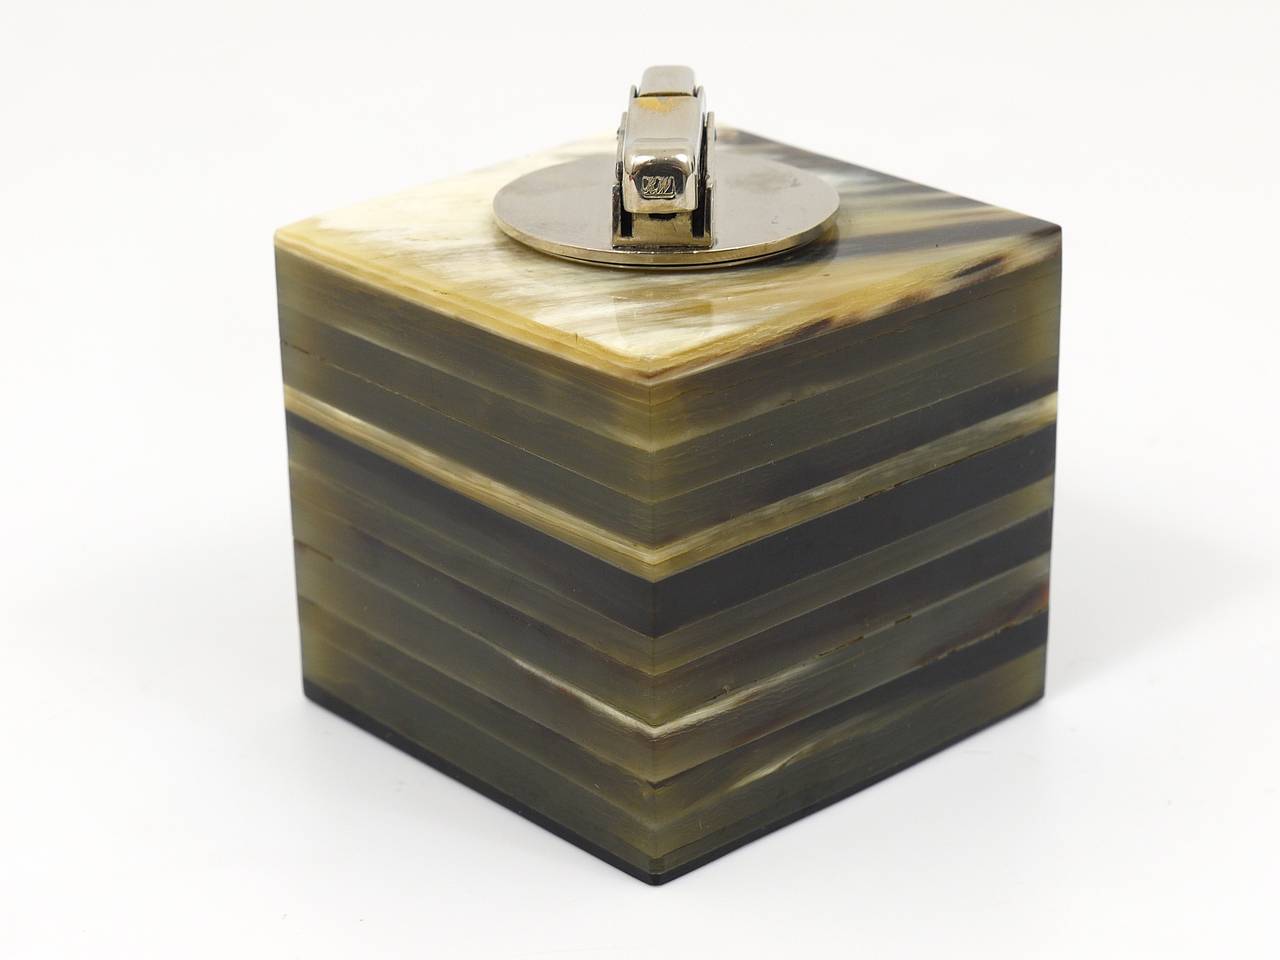 A beautiful table lighter, designed end executed in the 1950s by Carl Aubock, Vienna. A cube made of cow horn, with an integrated fuel lighter on top. Very good condition, nice patina, a very decorative object.